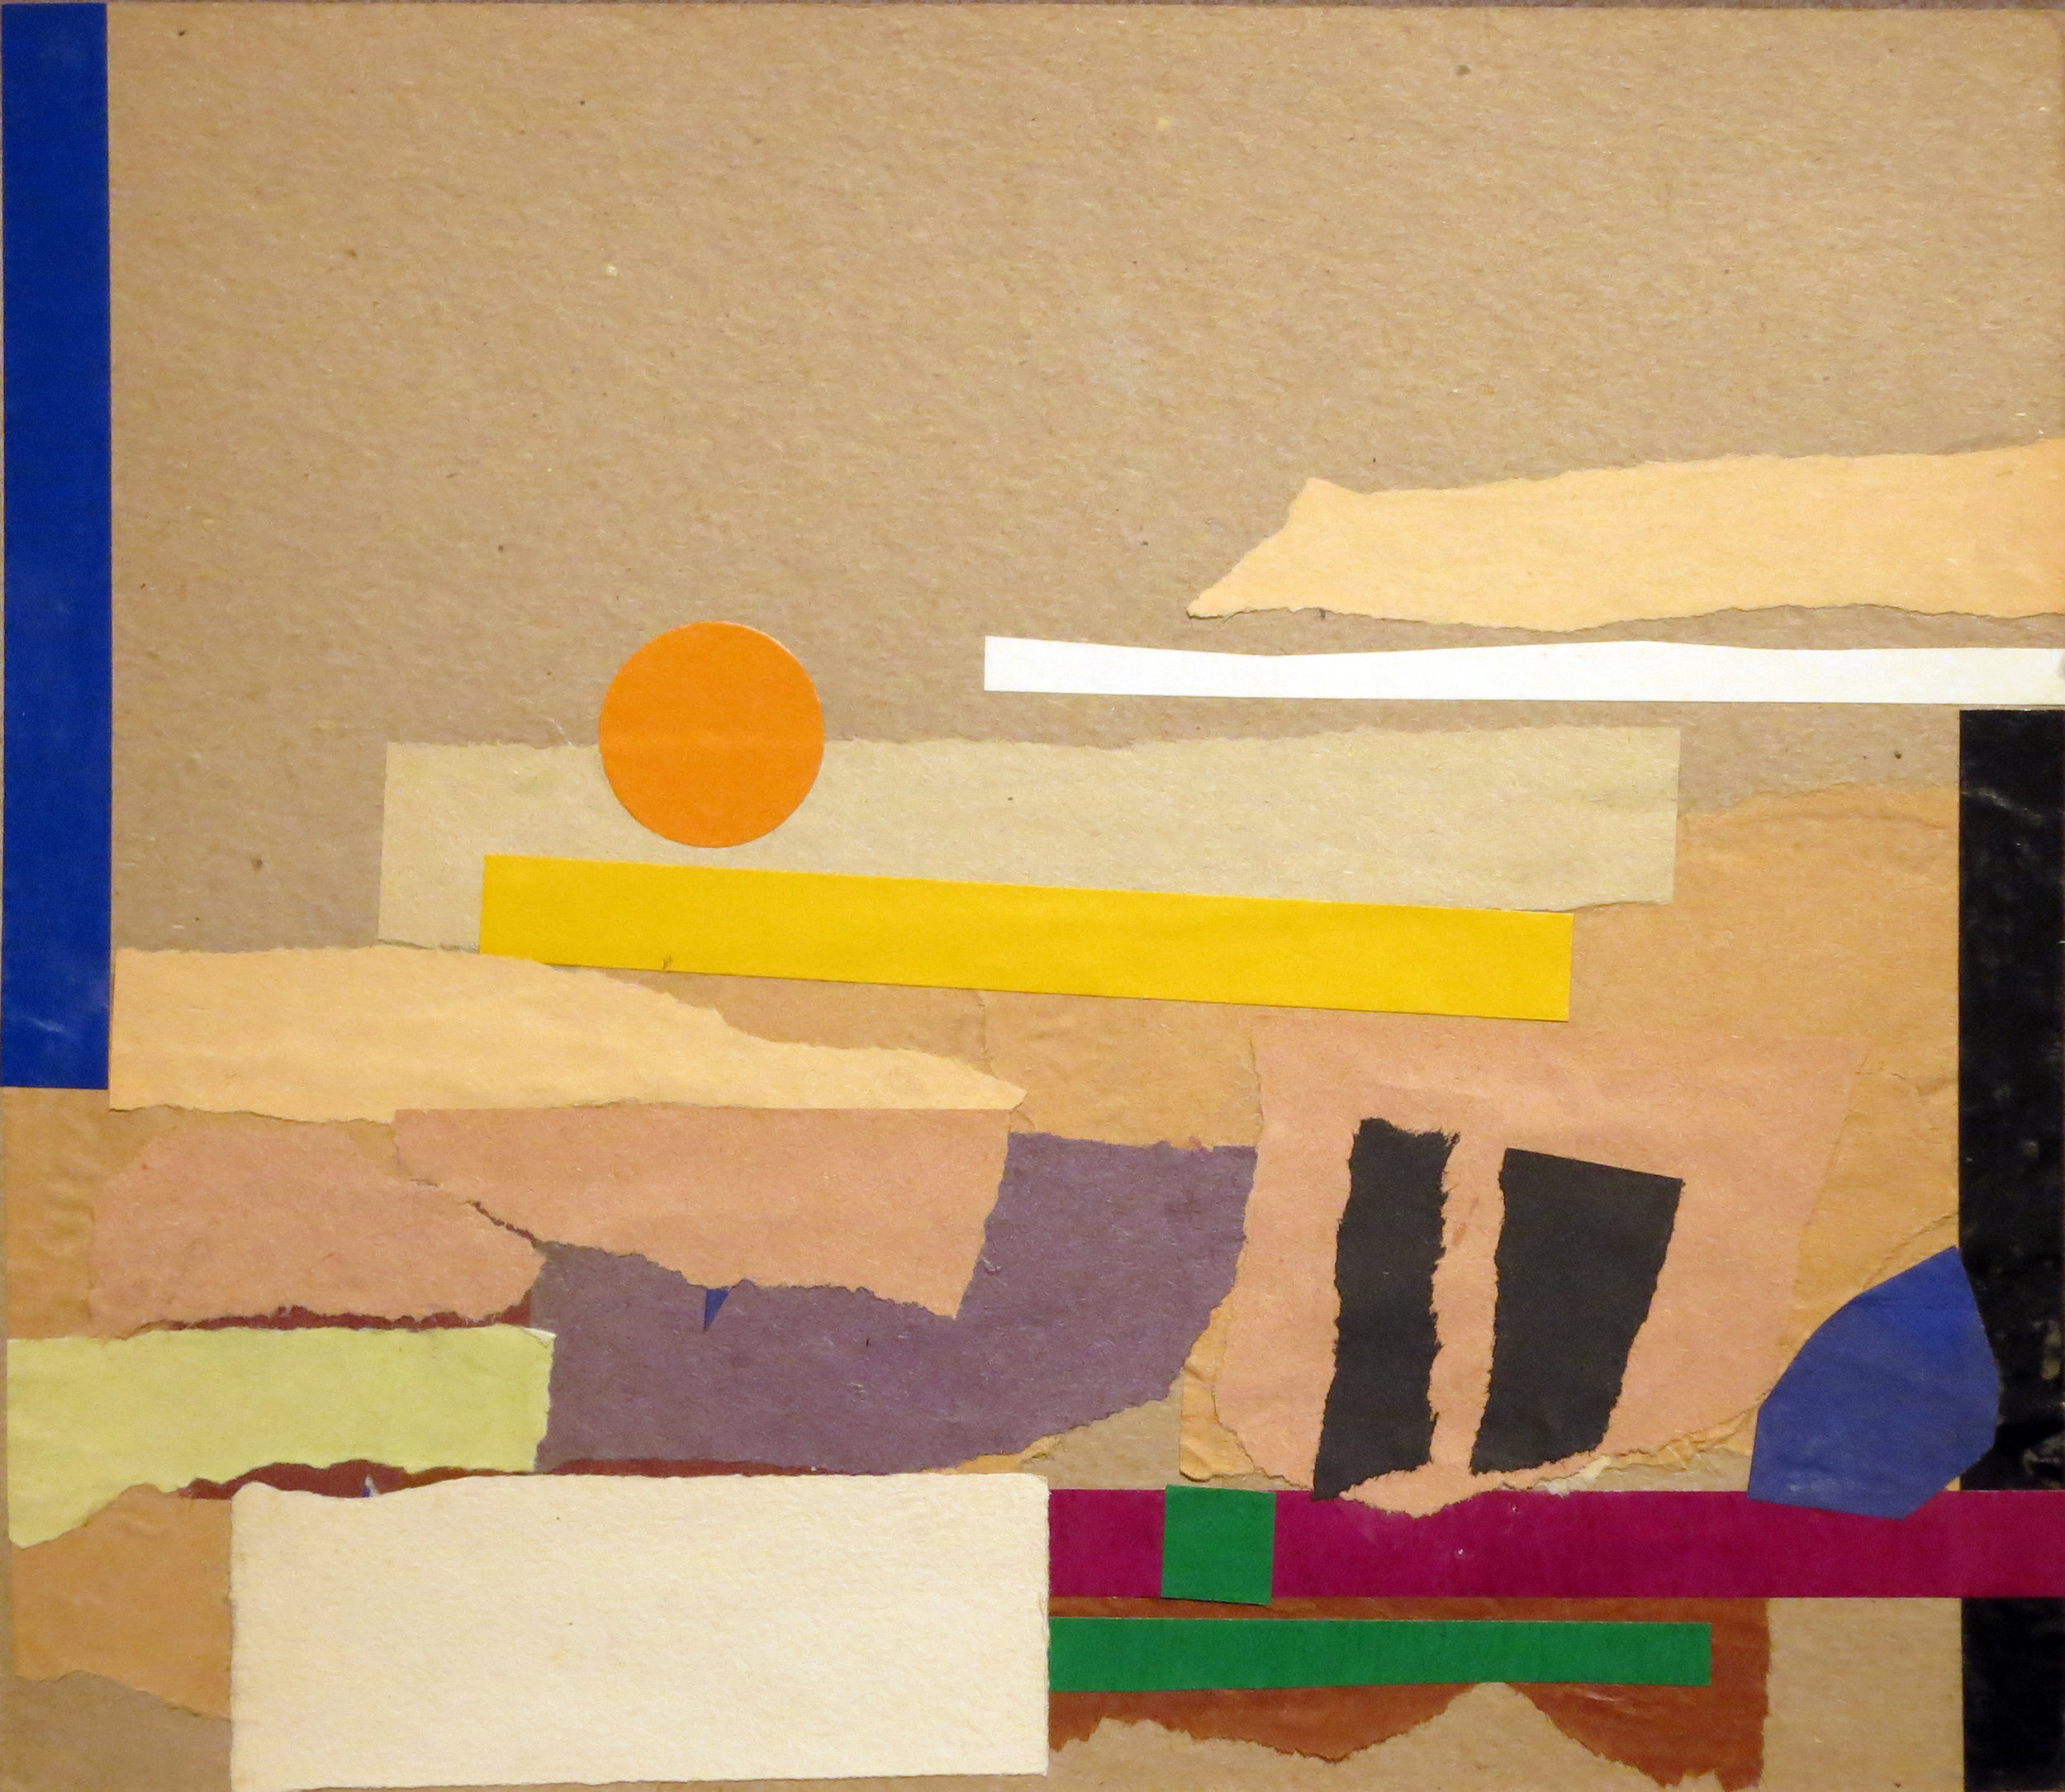 Abstract collage with strips of horizontal paper and orange sun